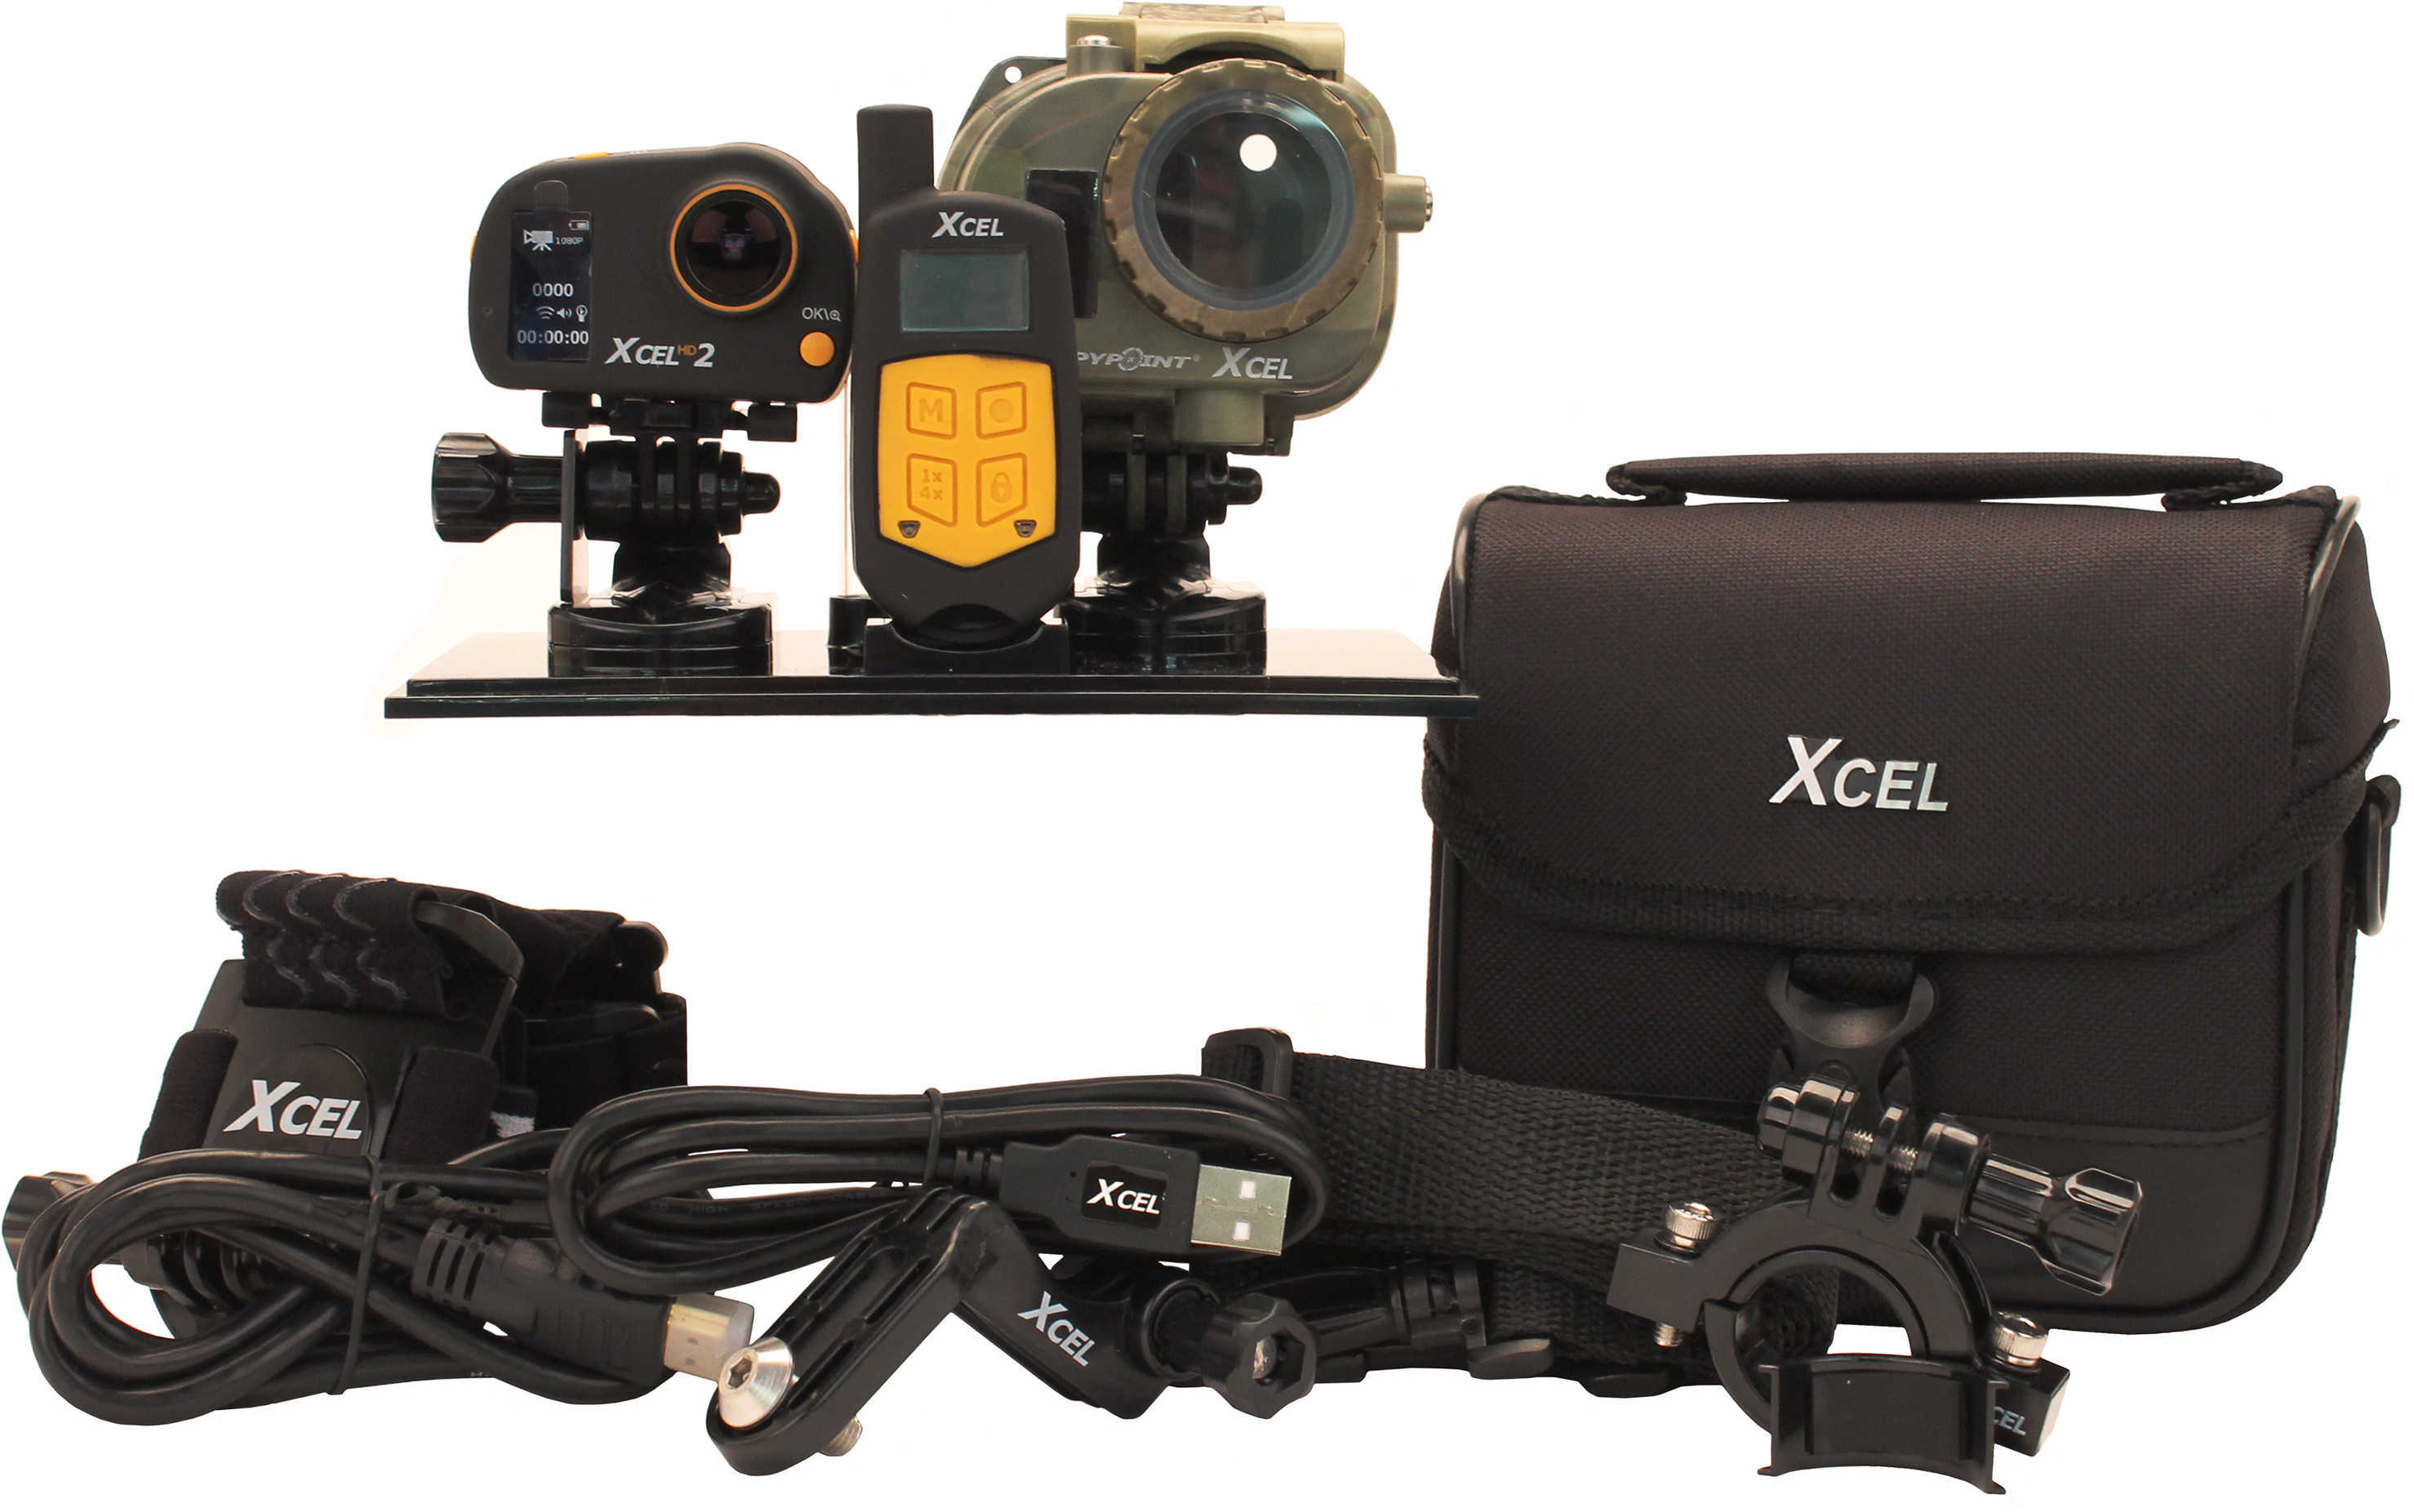 Spy Point SPYPOINT XCEL Action Video Cam Hunt Edition W/2-Way Remote HD